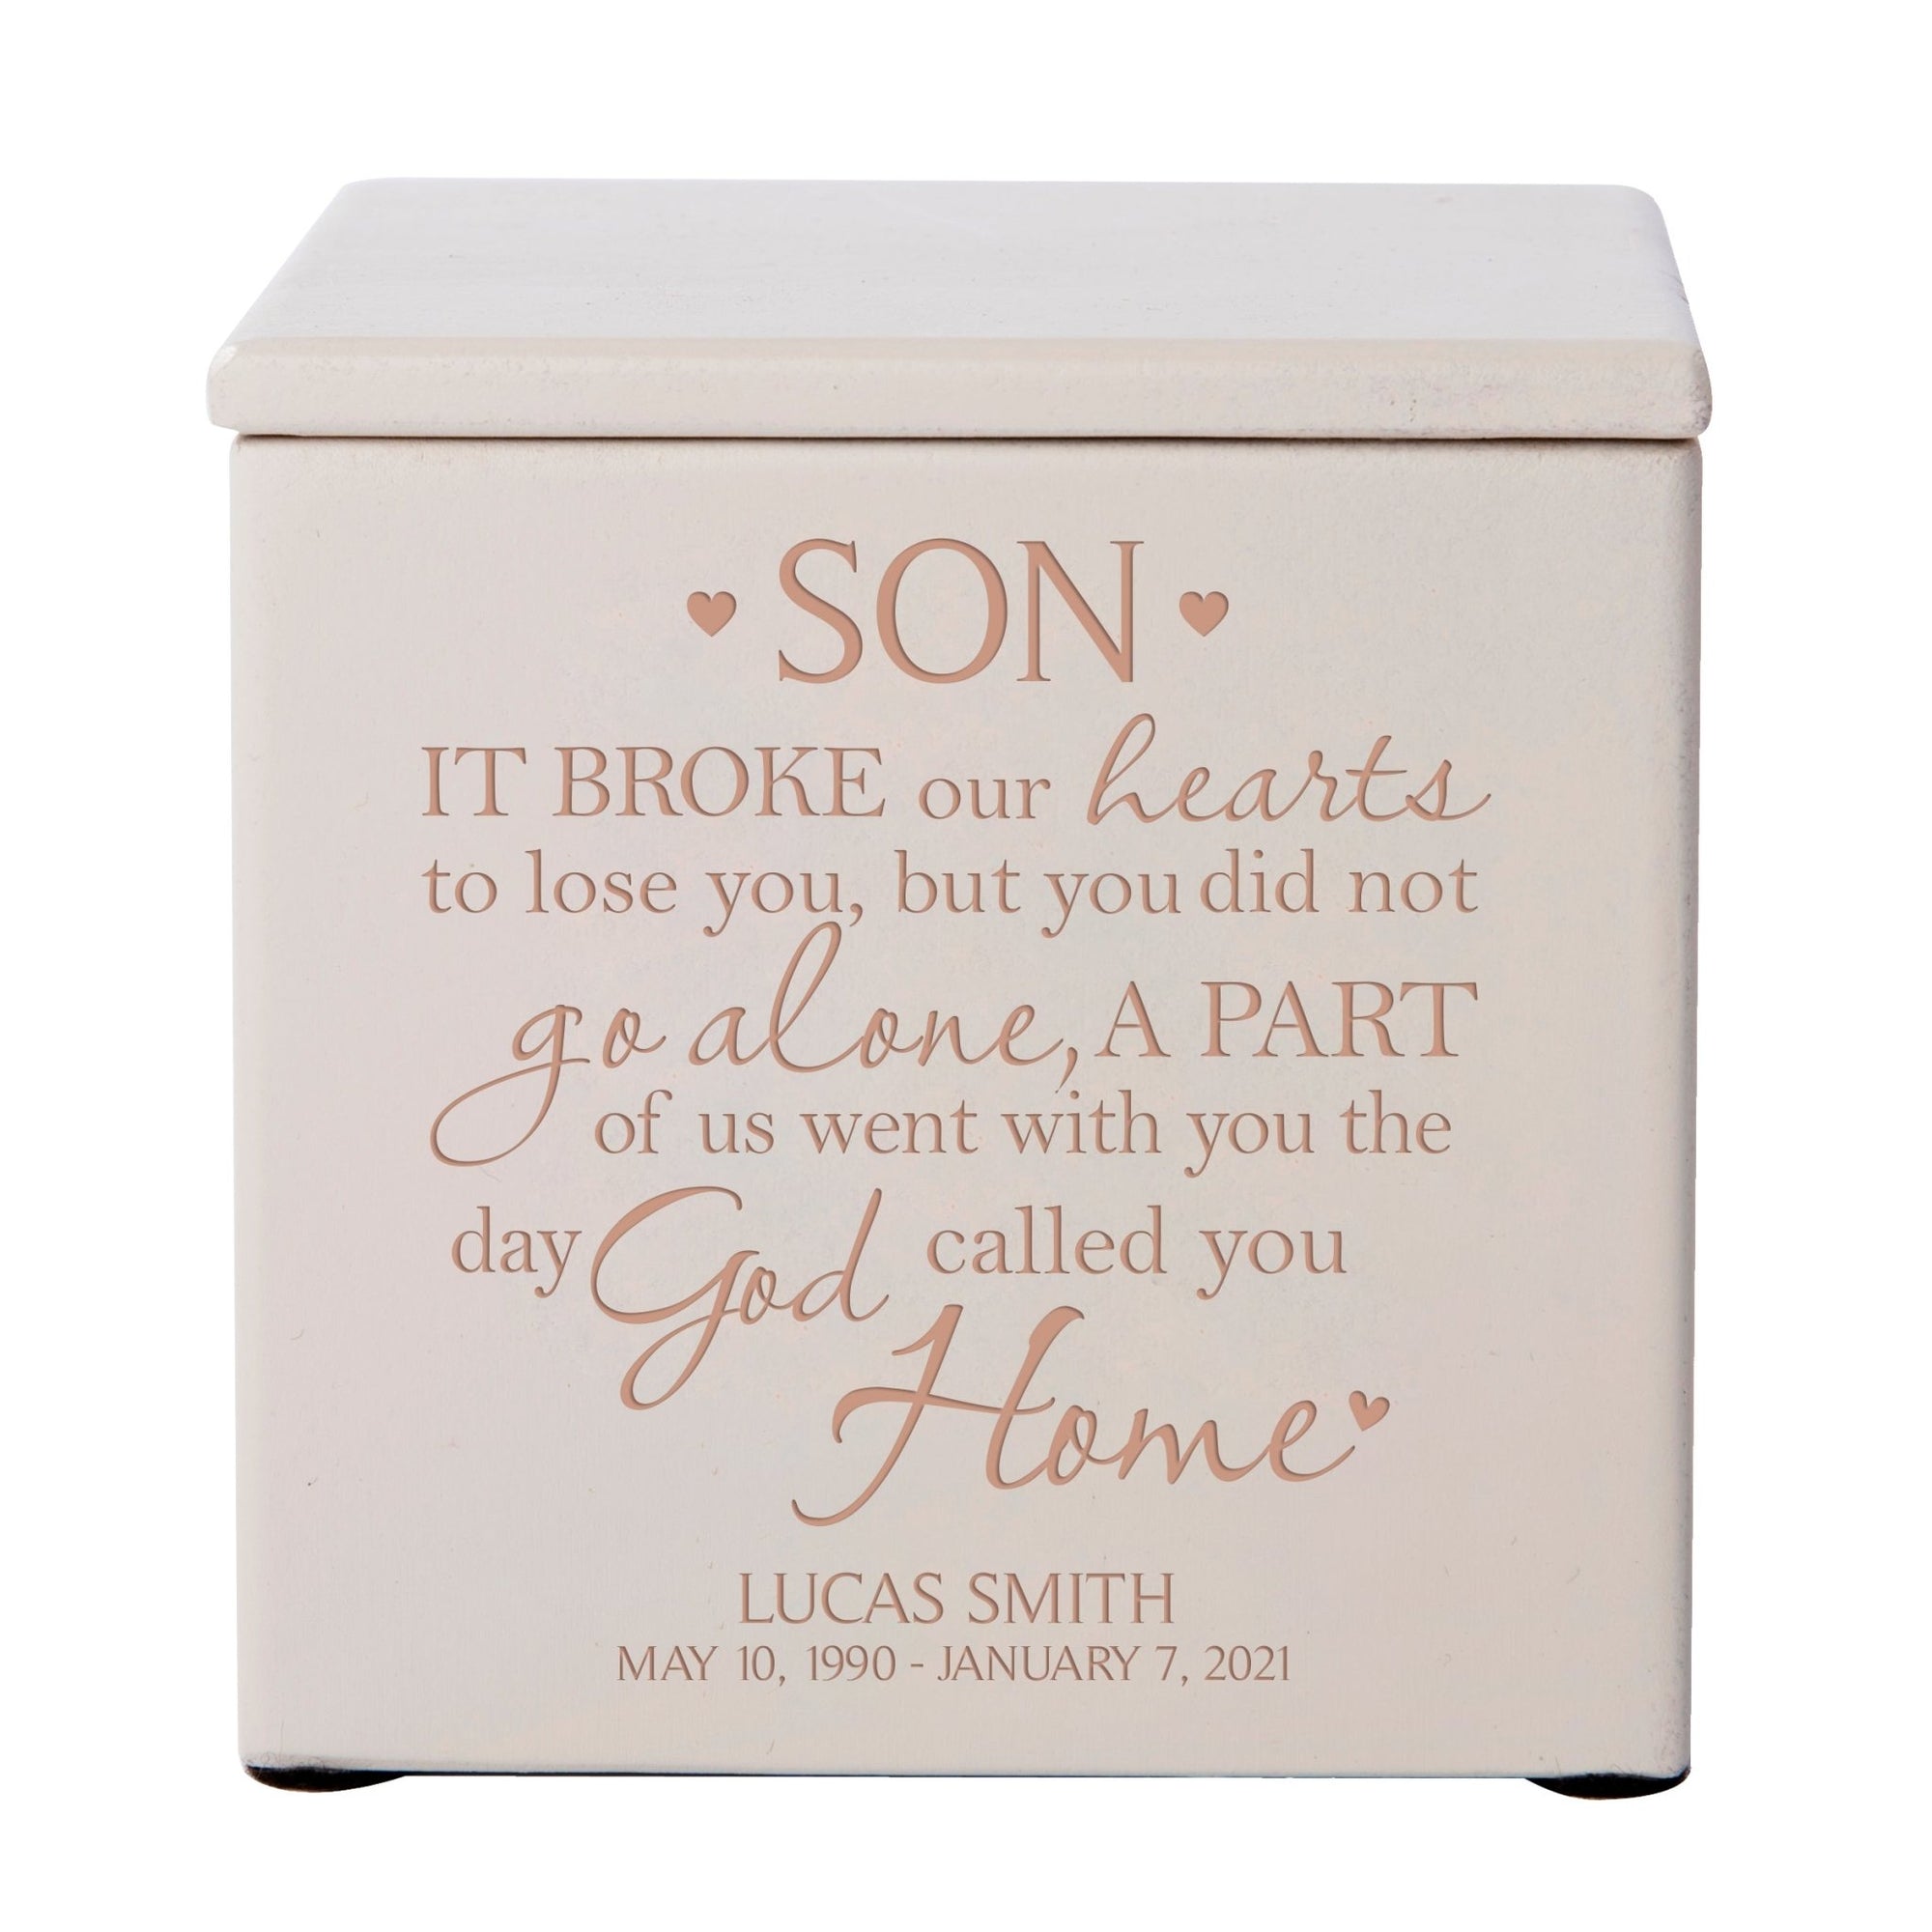 Custom Engraved Memorial 4.5x4.5in Cremation Urn Box Holds 49 Cu Inches Of Human Ashes (It Broke Our Hearts Son) Funeral and Condolence Keepsake - LifeSong Milestones